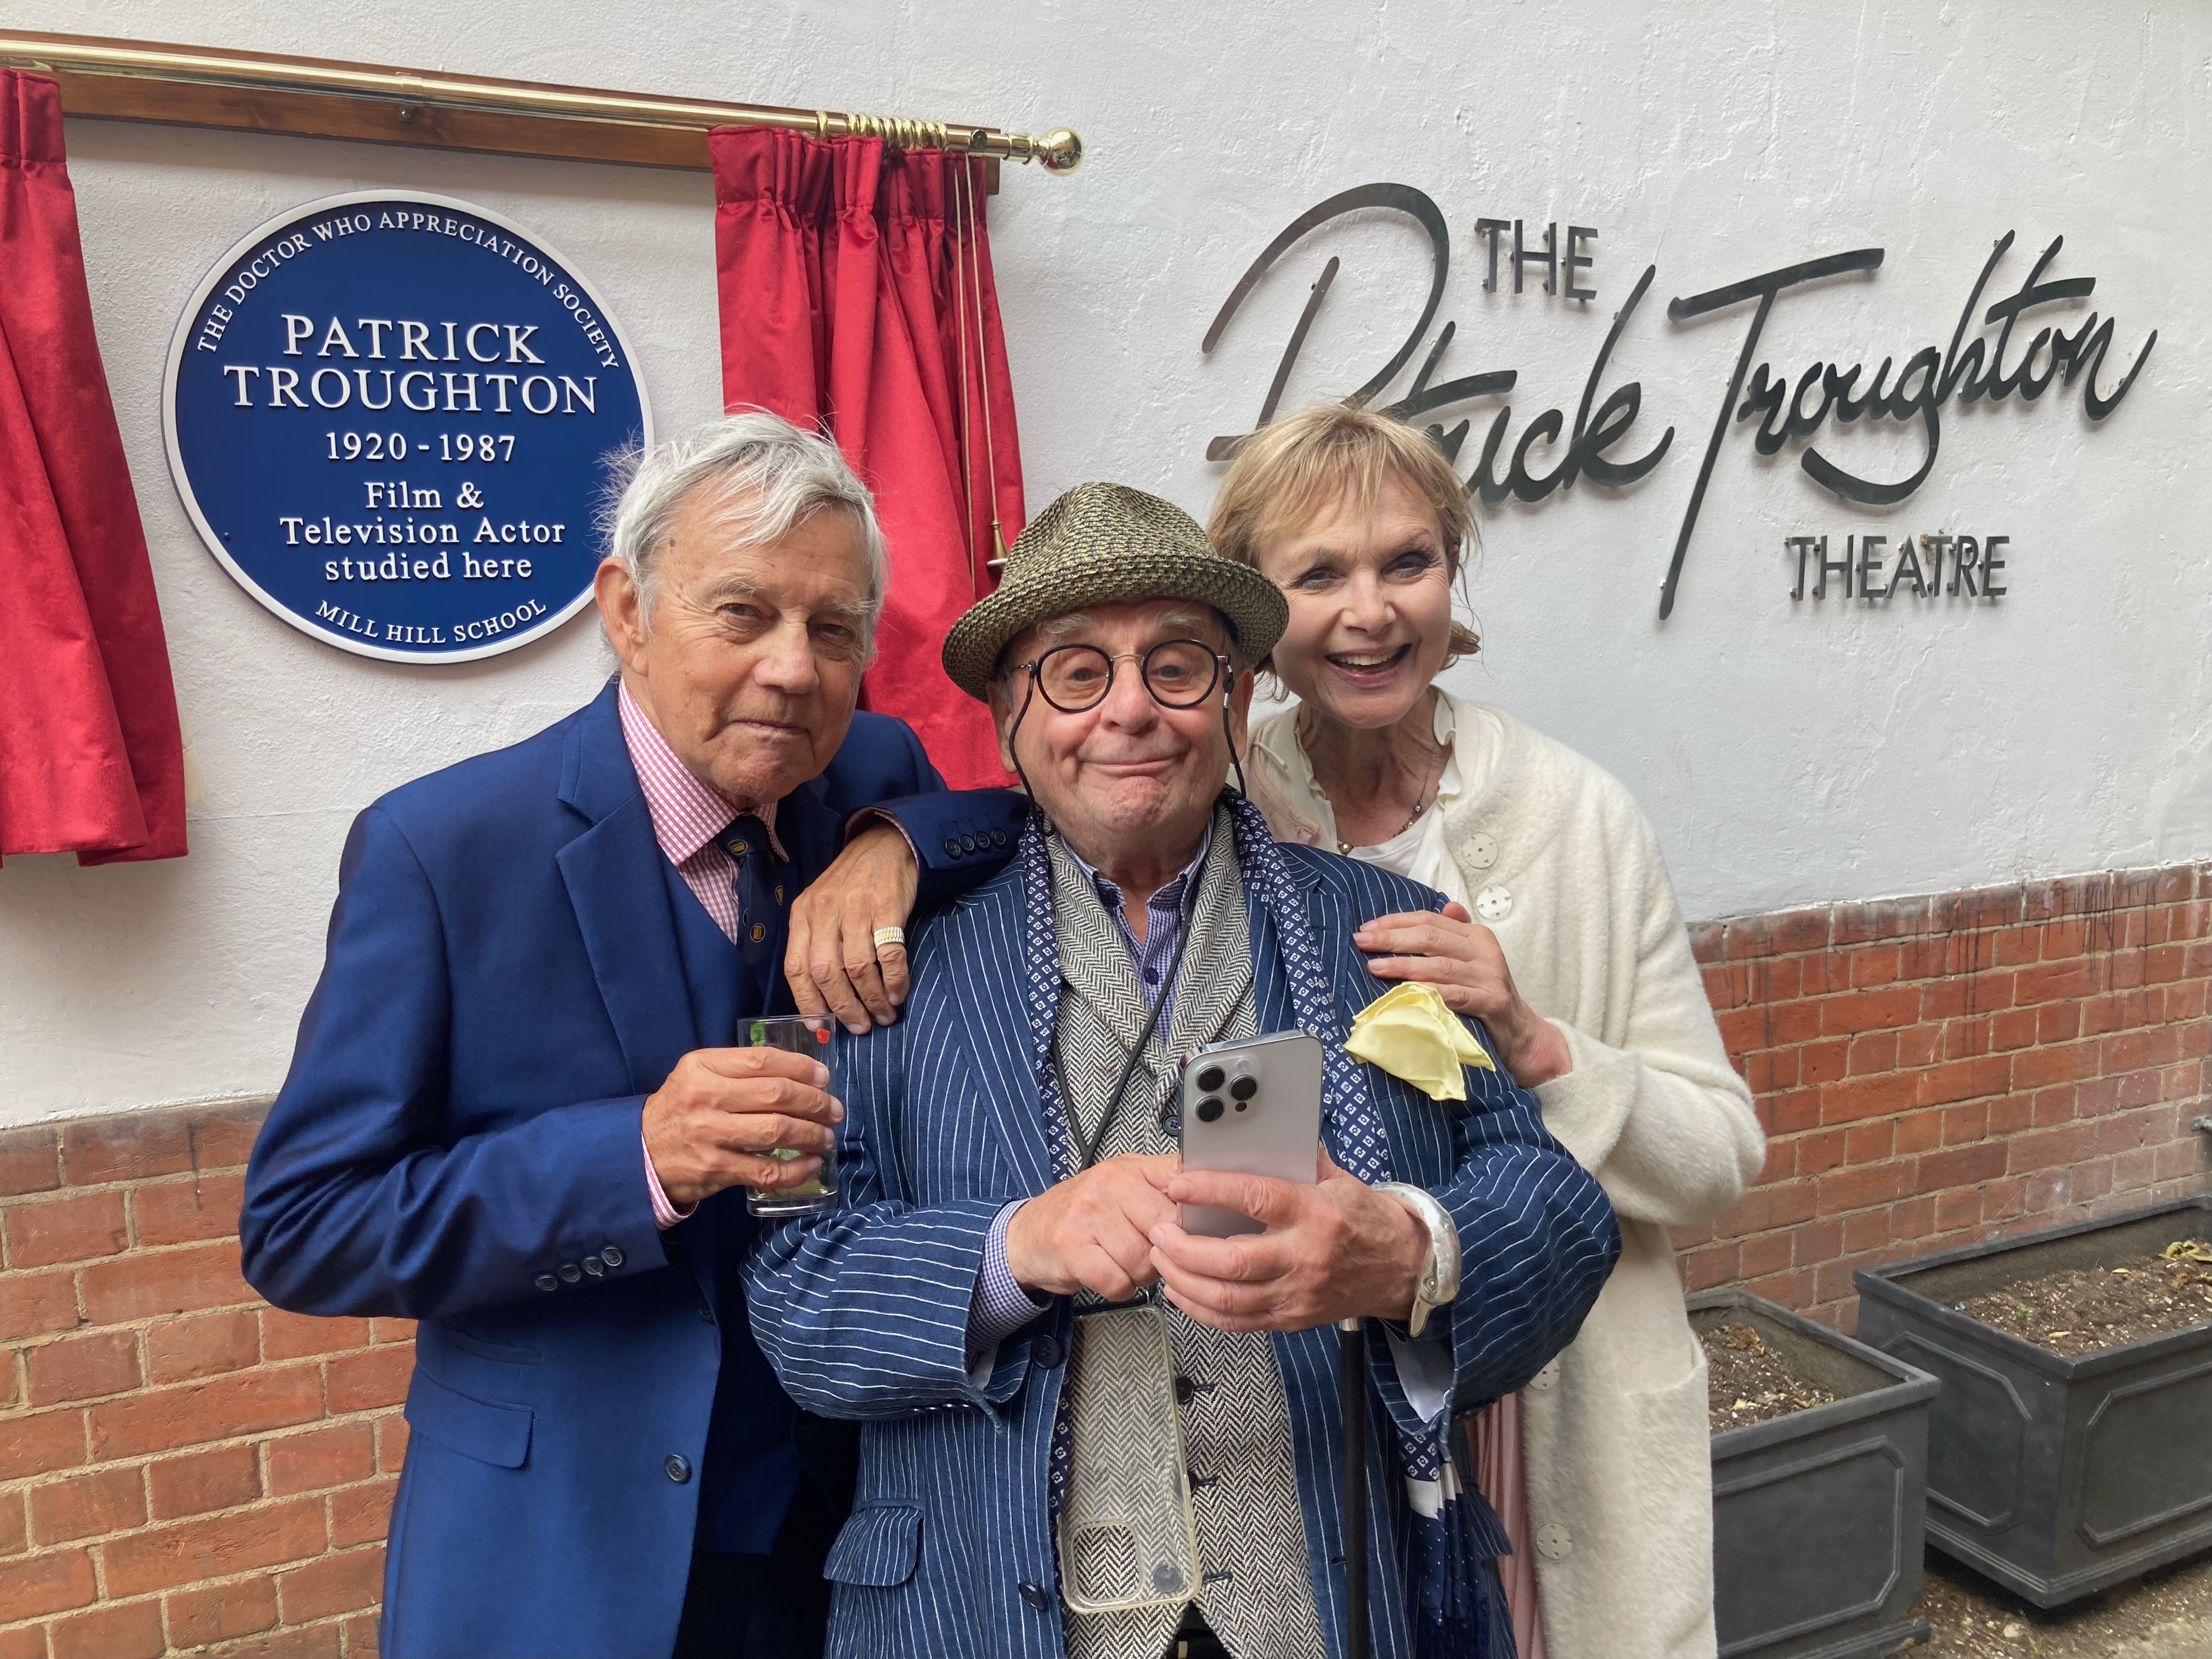 With Frazer Hines and Sylvester McCoy. Photo by Peter Fuller.